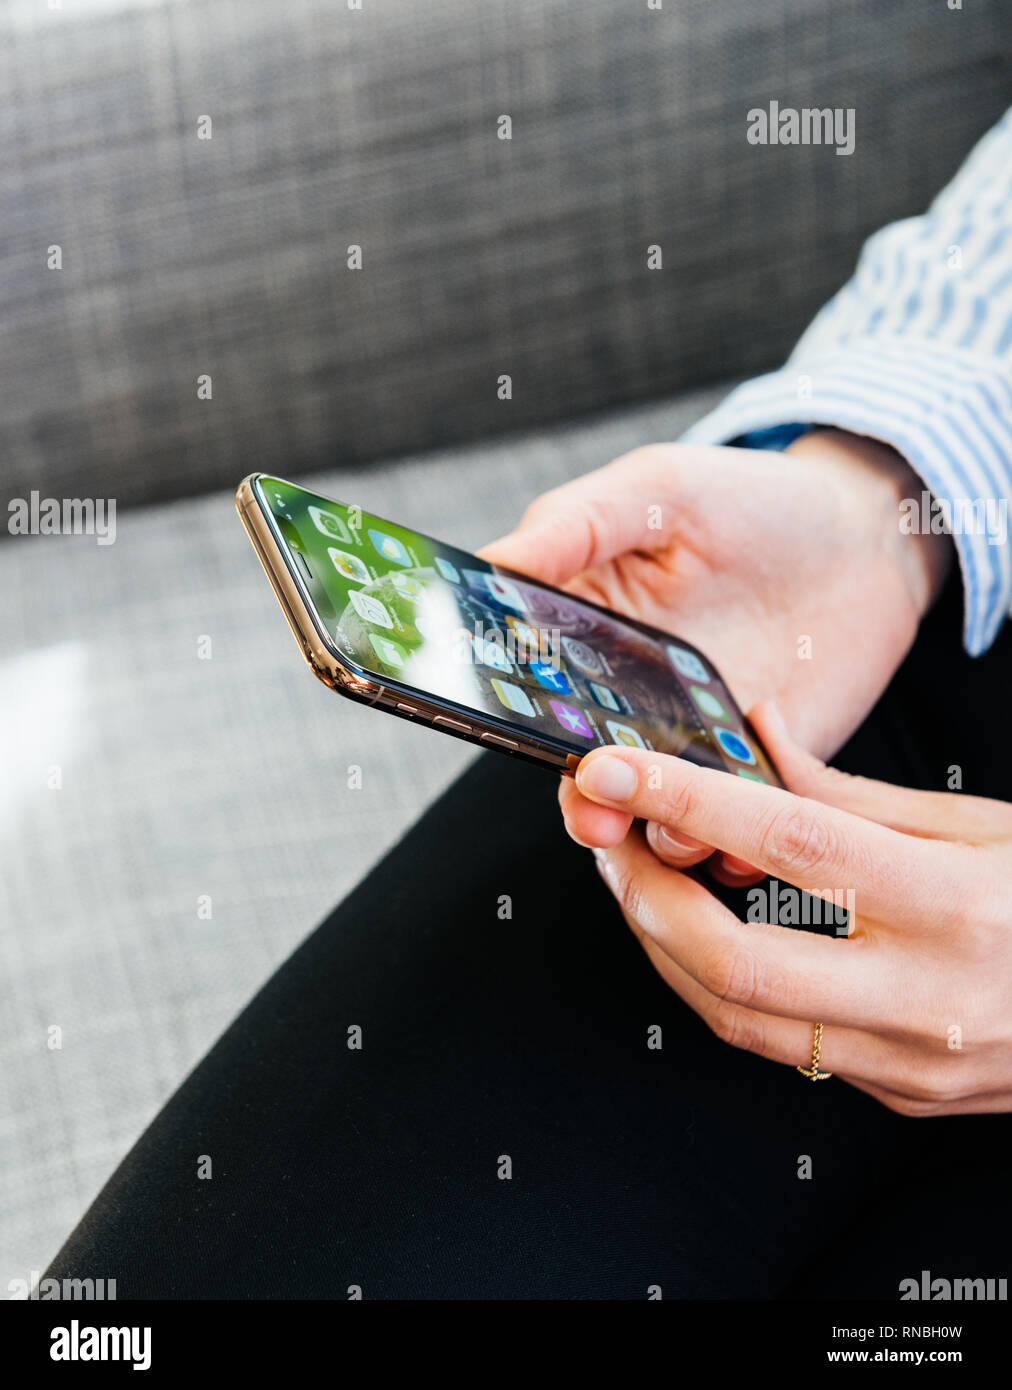 PARIS, FRANCE - SEP 27, 2018: hands using the newest latest iPhone Xs and Xs Max smartphone telephone from Apple Computers on office living room sofa Stock Photo